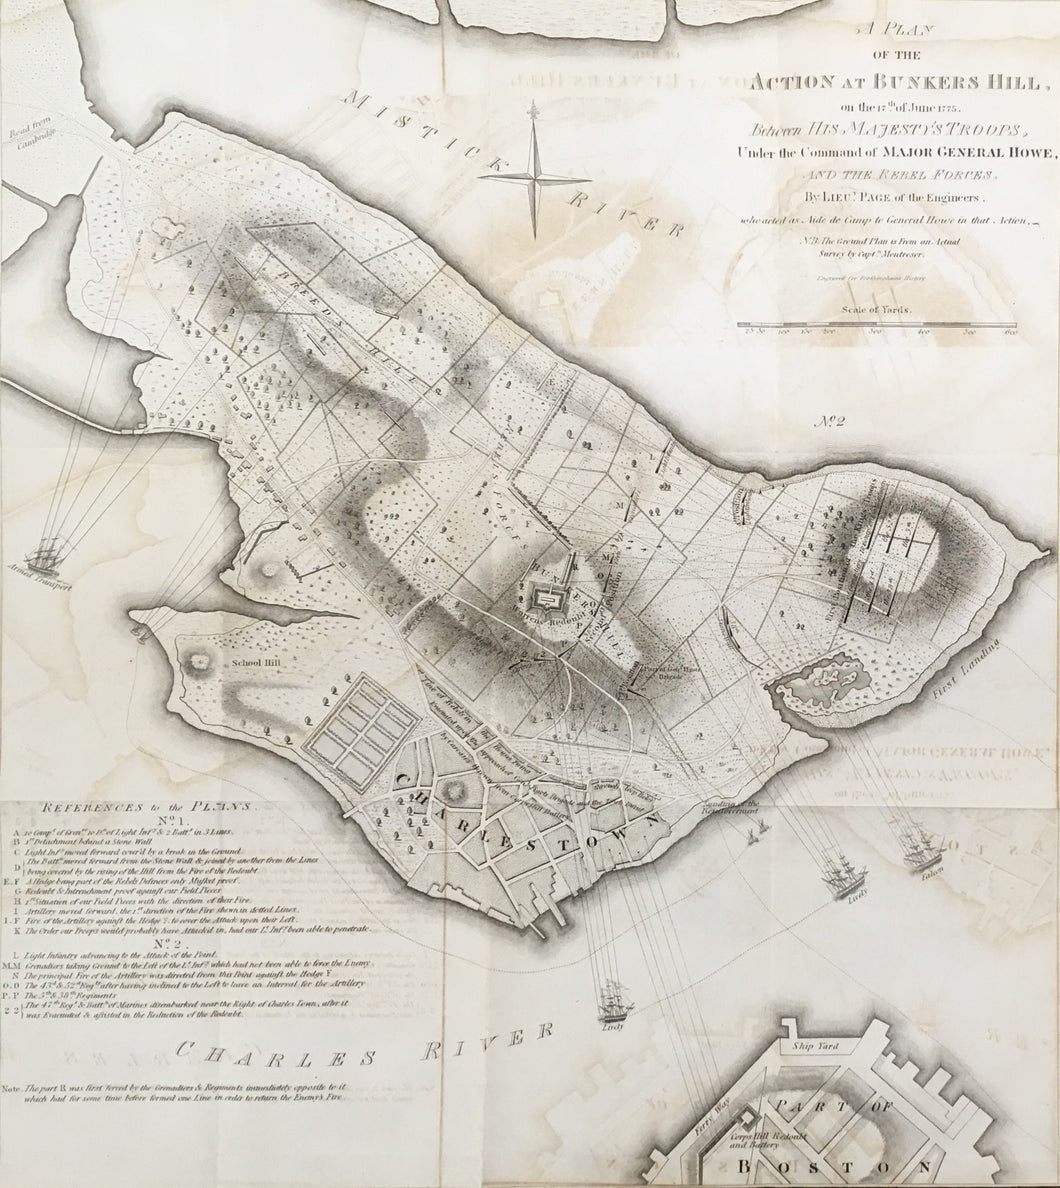 Faden, William “A Plan of the Action at Bunker's Hill, on the 17th. of June, 1775...